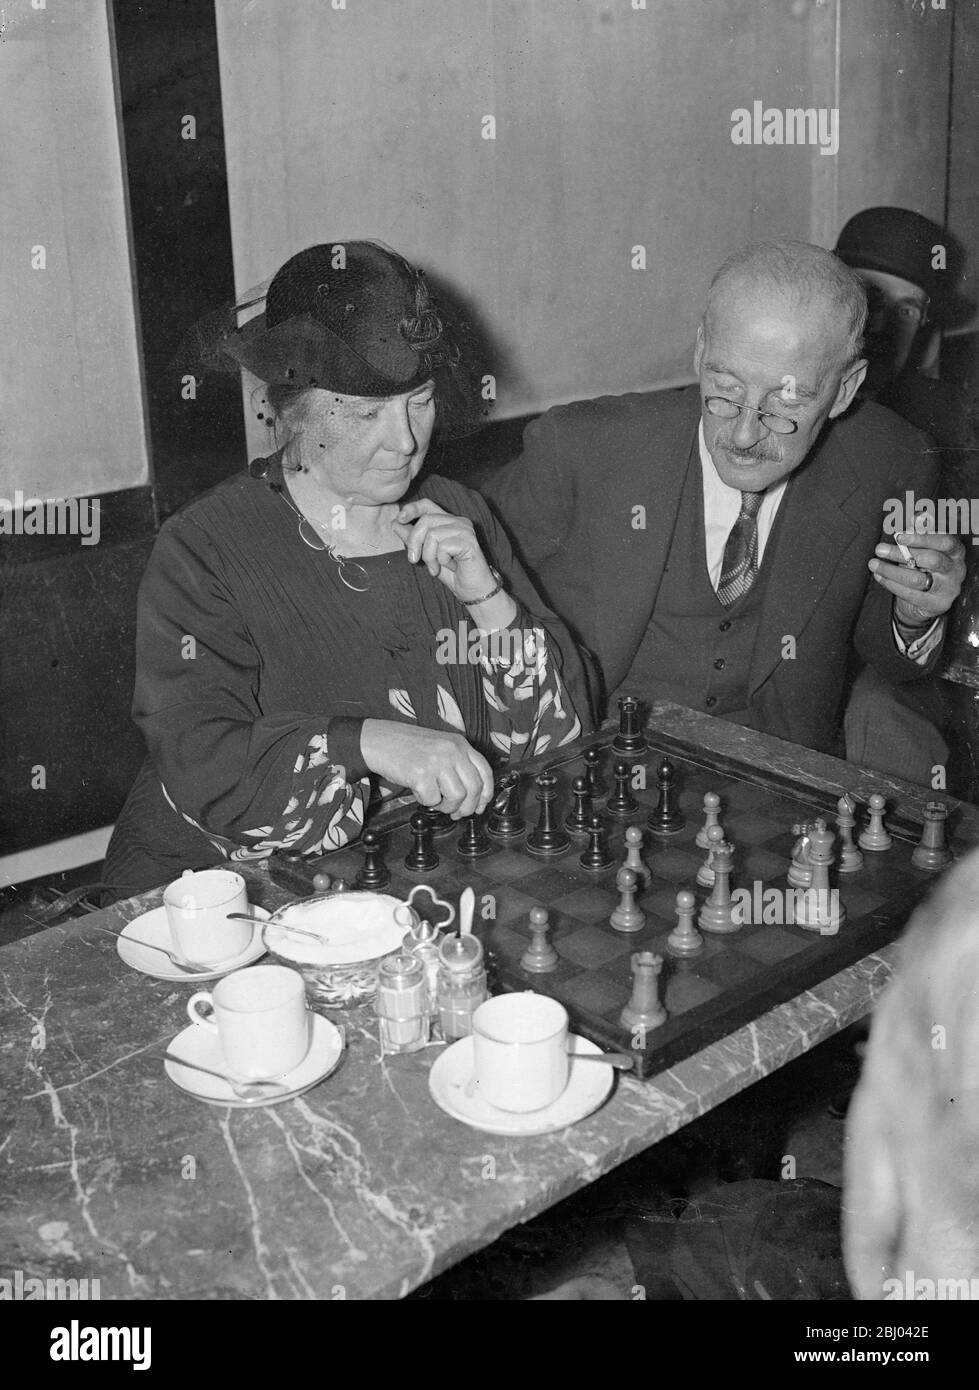 Women's champion runs city cafe devoted chess. - Sitting tense in a silence broken only by the rattler coffee cups, chess 'friends' have found a haven in a City of London cafe, aptly named 'The Gambit' in Budge Row. - The only cafe in the world dedicated entirely to chess, it is run by Miss Edith Price, who has been in Budge Row for 37 years and has herself been four times woman chess champion of Great Britain. - Many of the players come from all parts of London and some stay till well past midnight. - Photo shows, Miss Edith Price thinking out a move during a game with one of her customers at Stock Photo